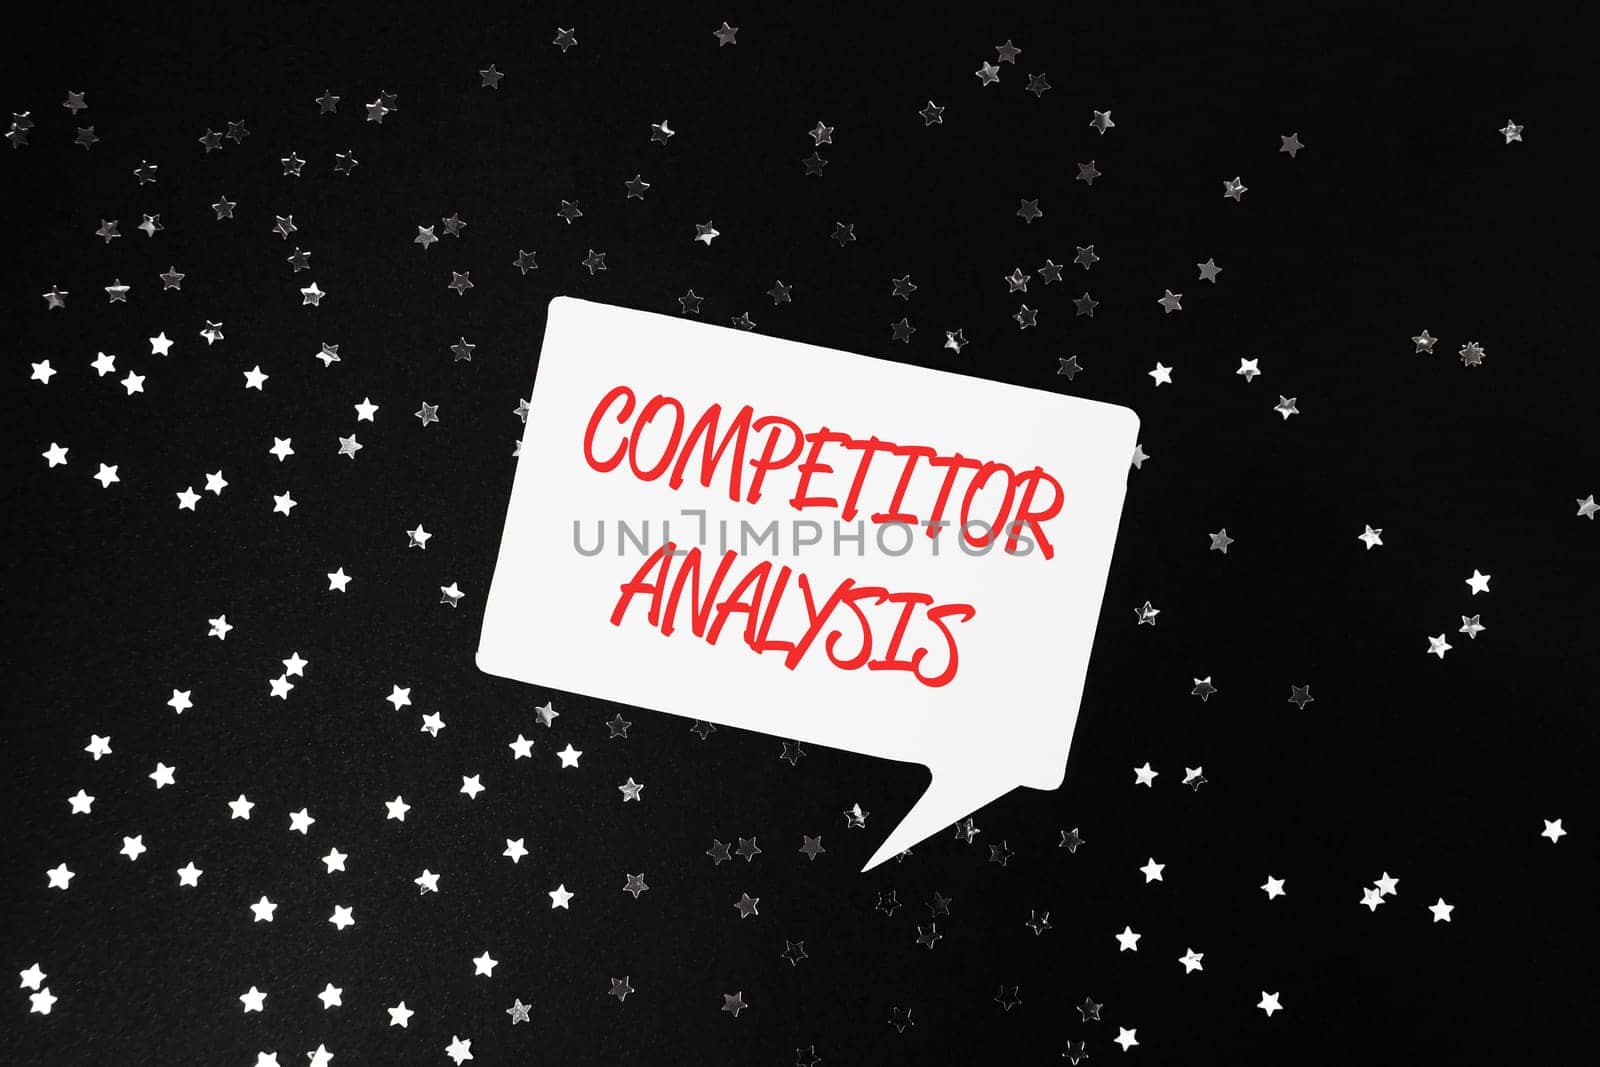 A white sign with red letters that says Competitor Analysis is surrounded by a star pattern